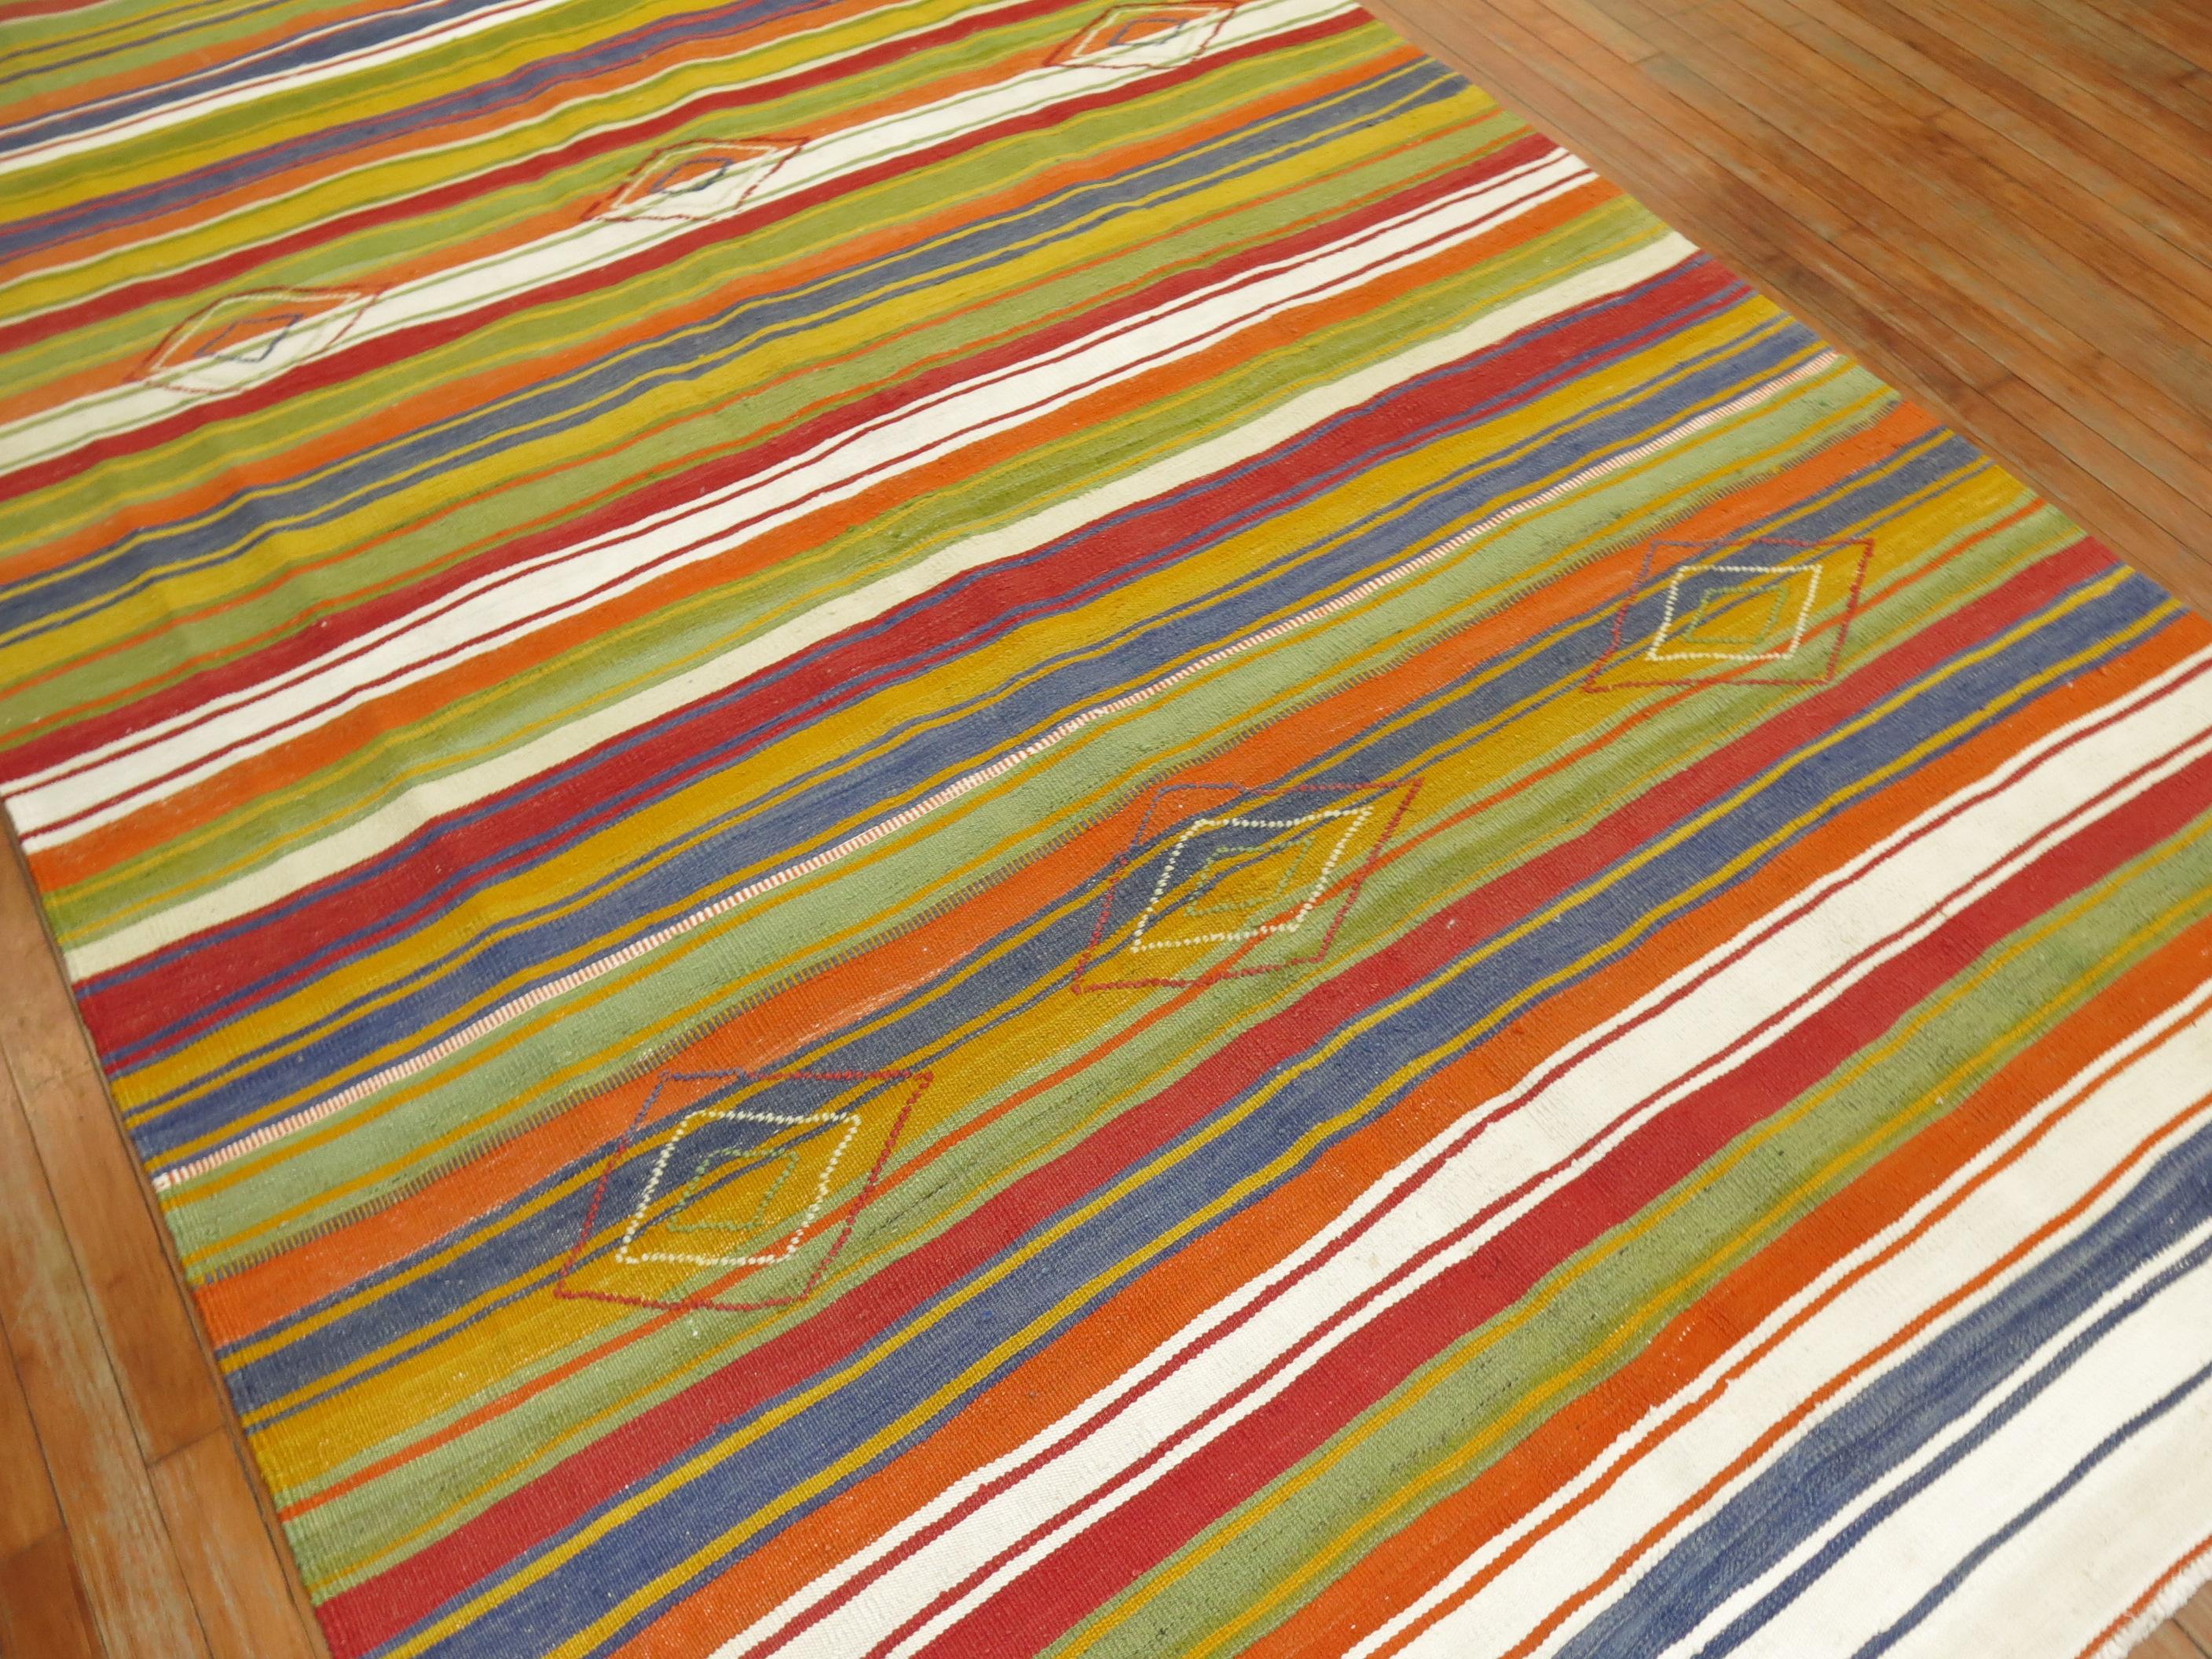 20th century Turkish Kilim with a striped design in jolly rancher tones.